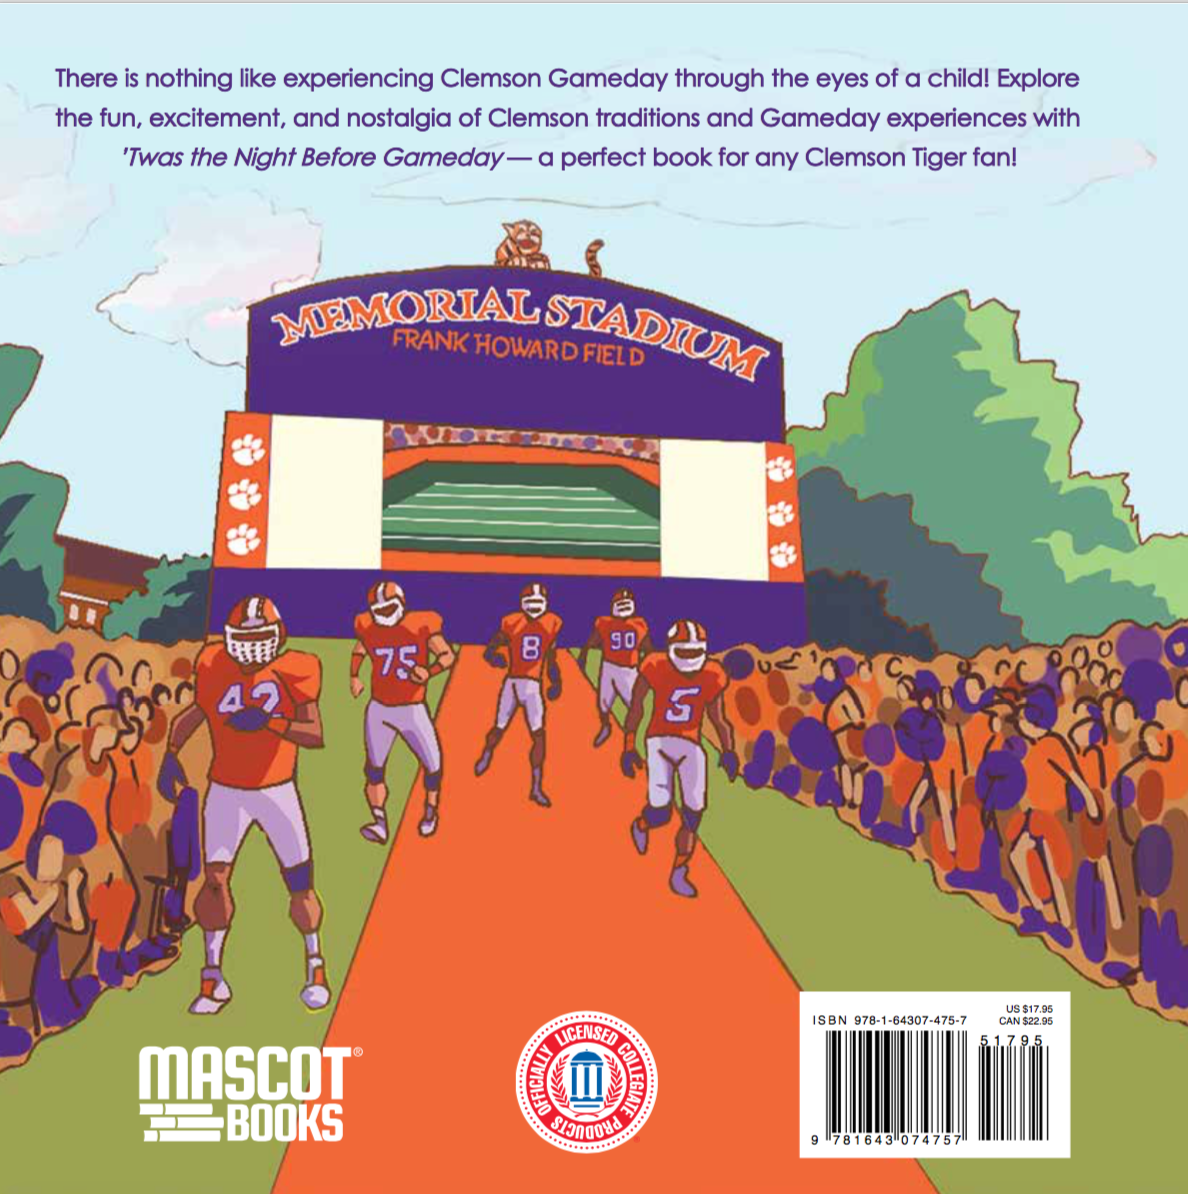 Twas the Night Before Storybook - Clemson Tigers